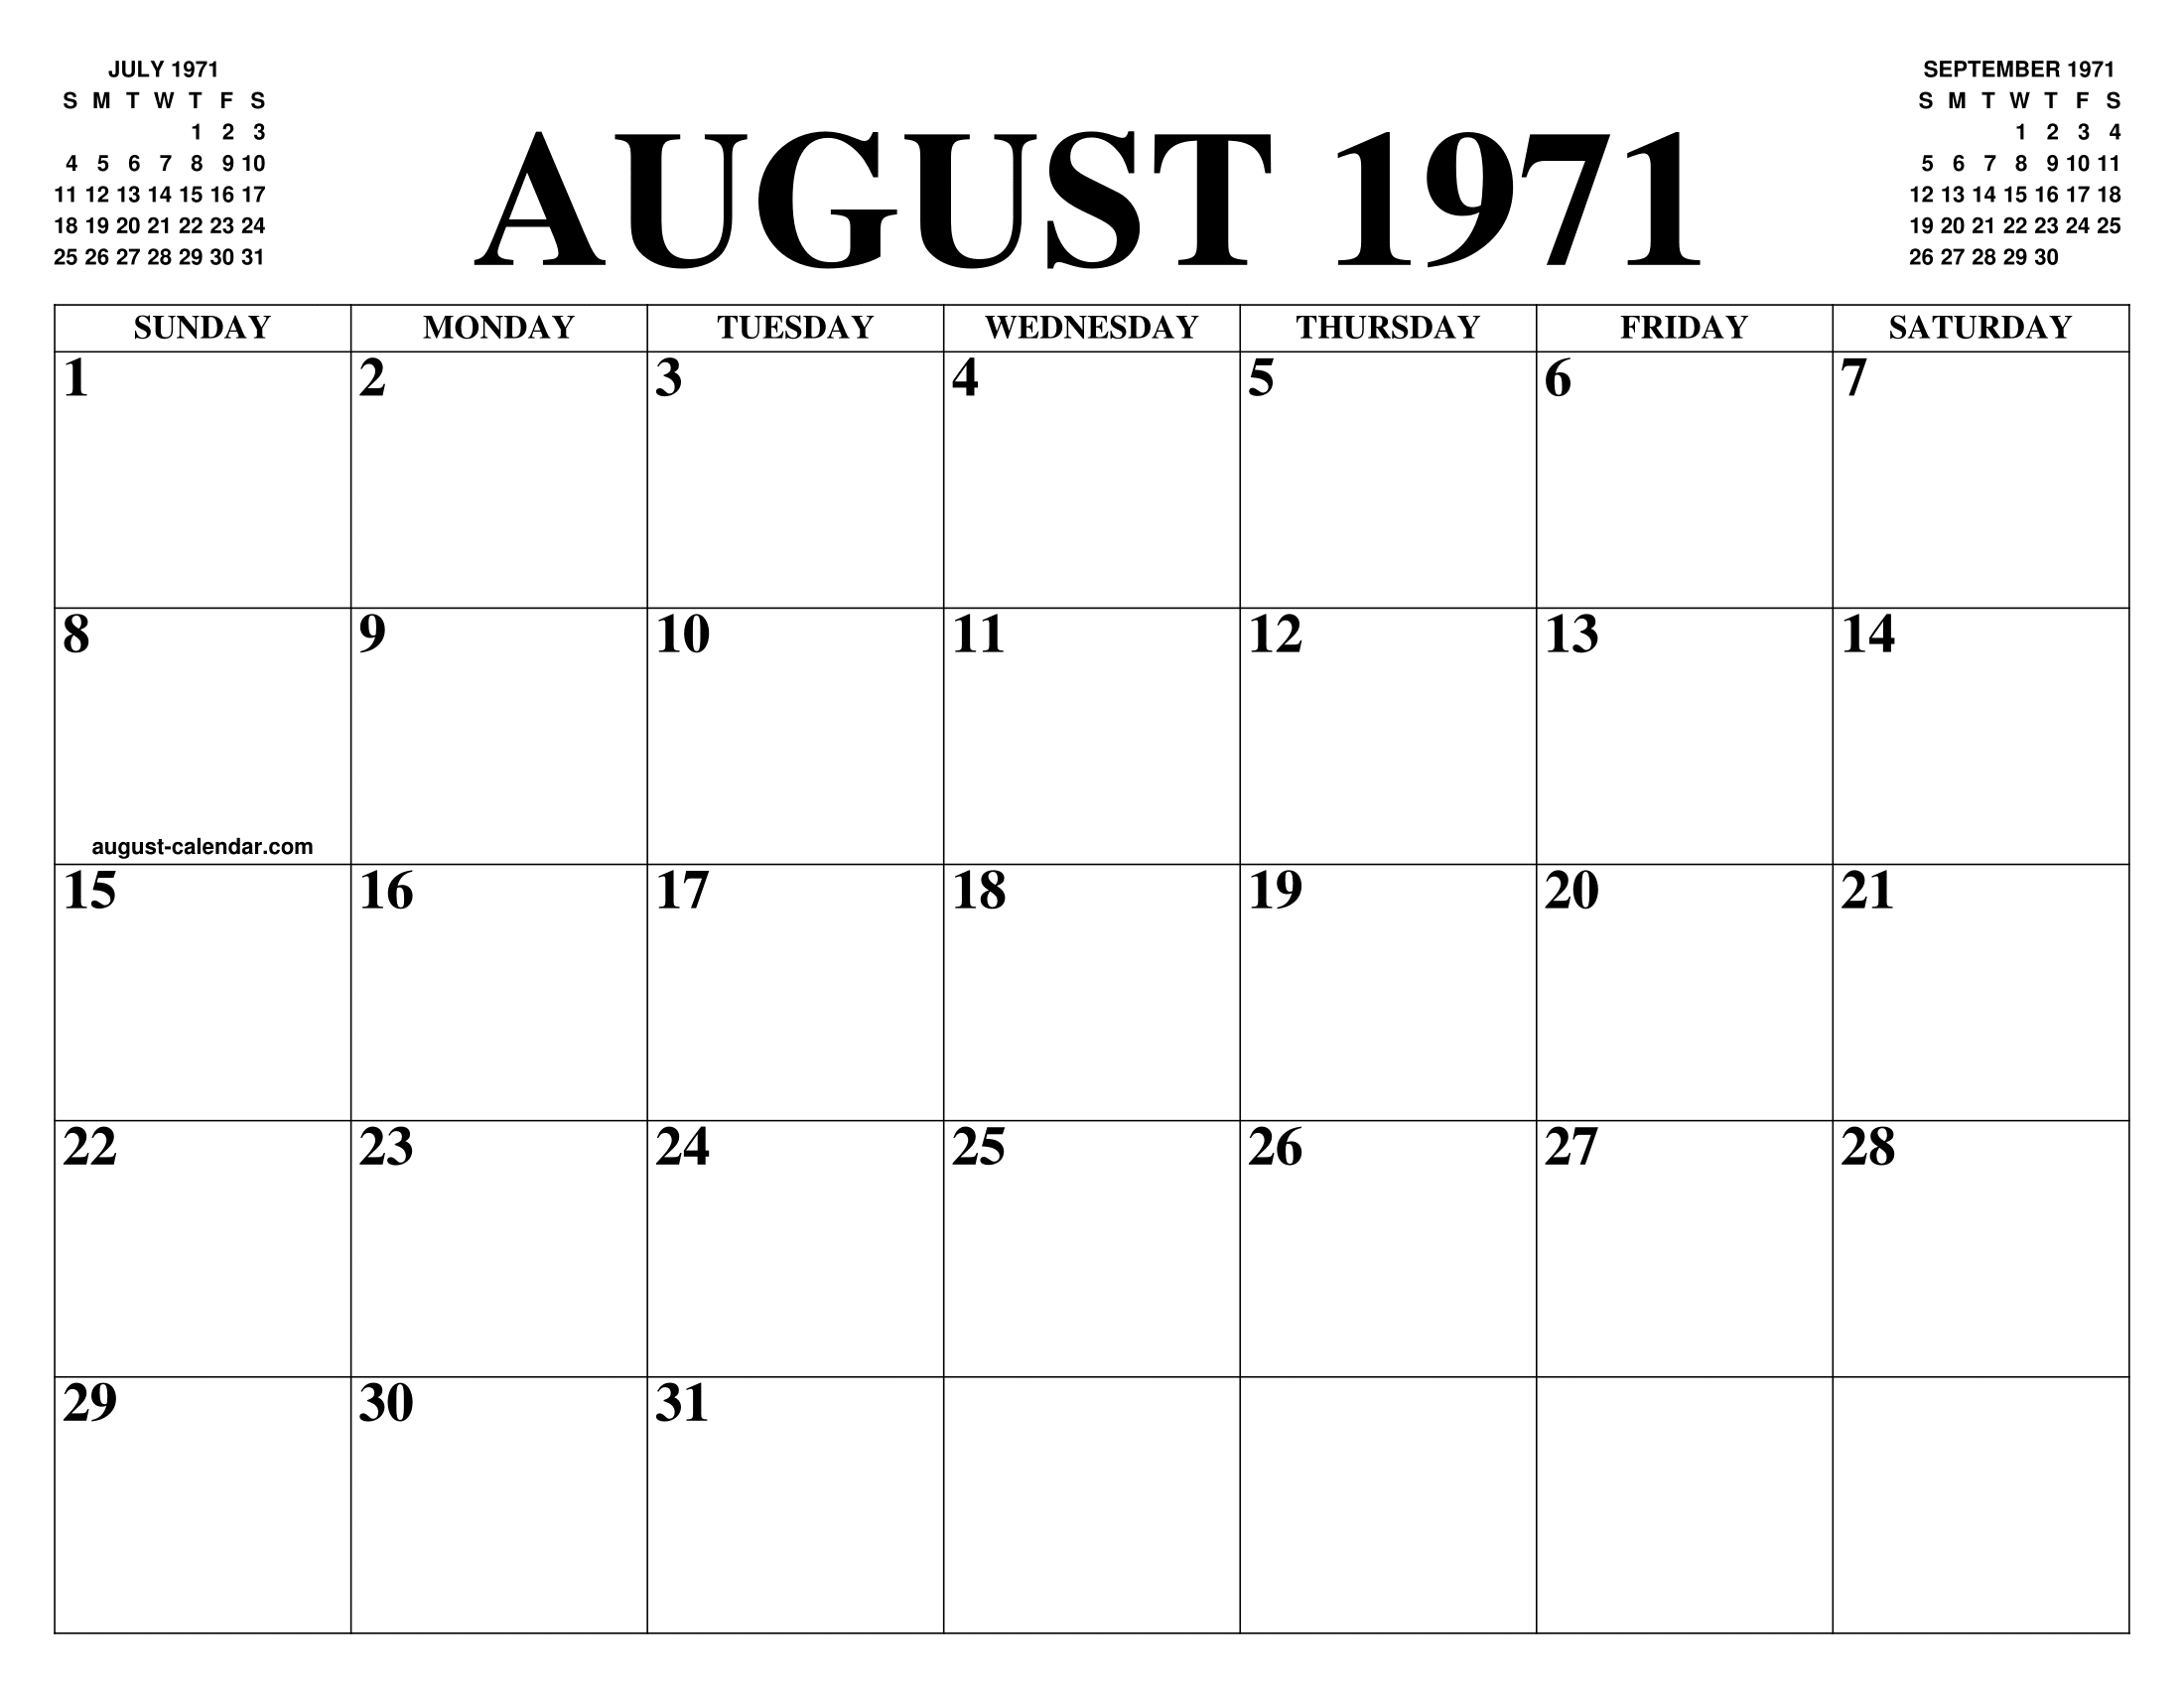 AUGUST 1971 CALENDAR OF THE MONTH: FREE PRINTABLE AUGUST CALENDAR OF